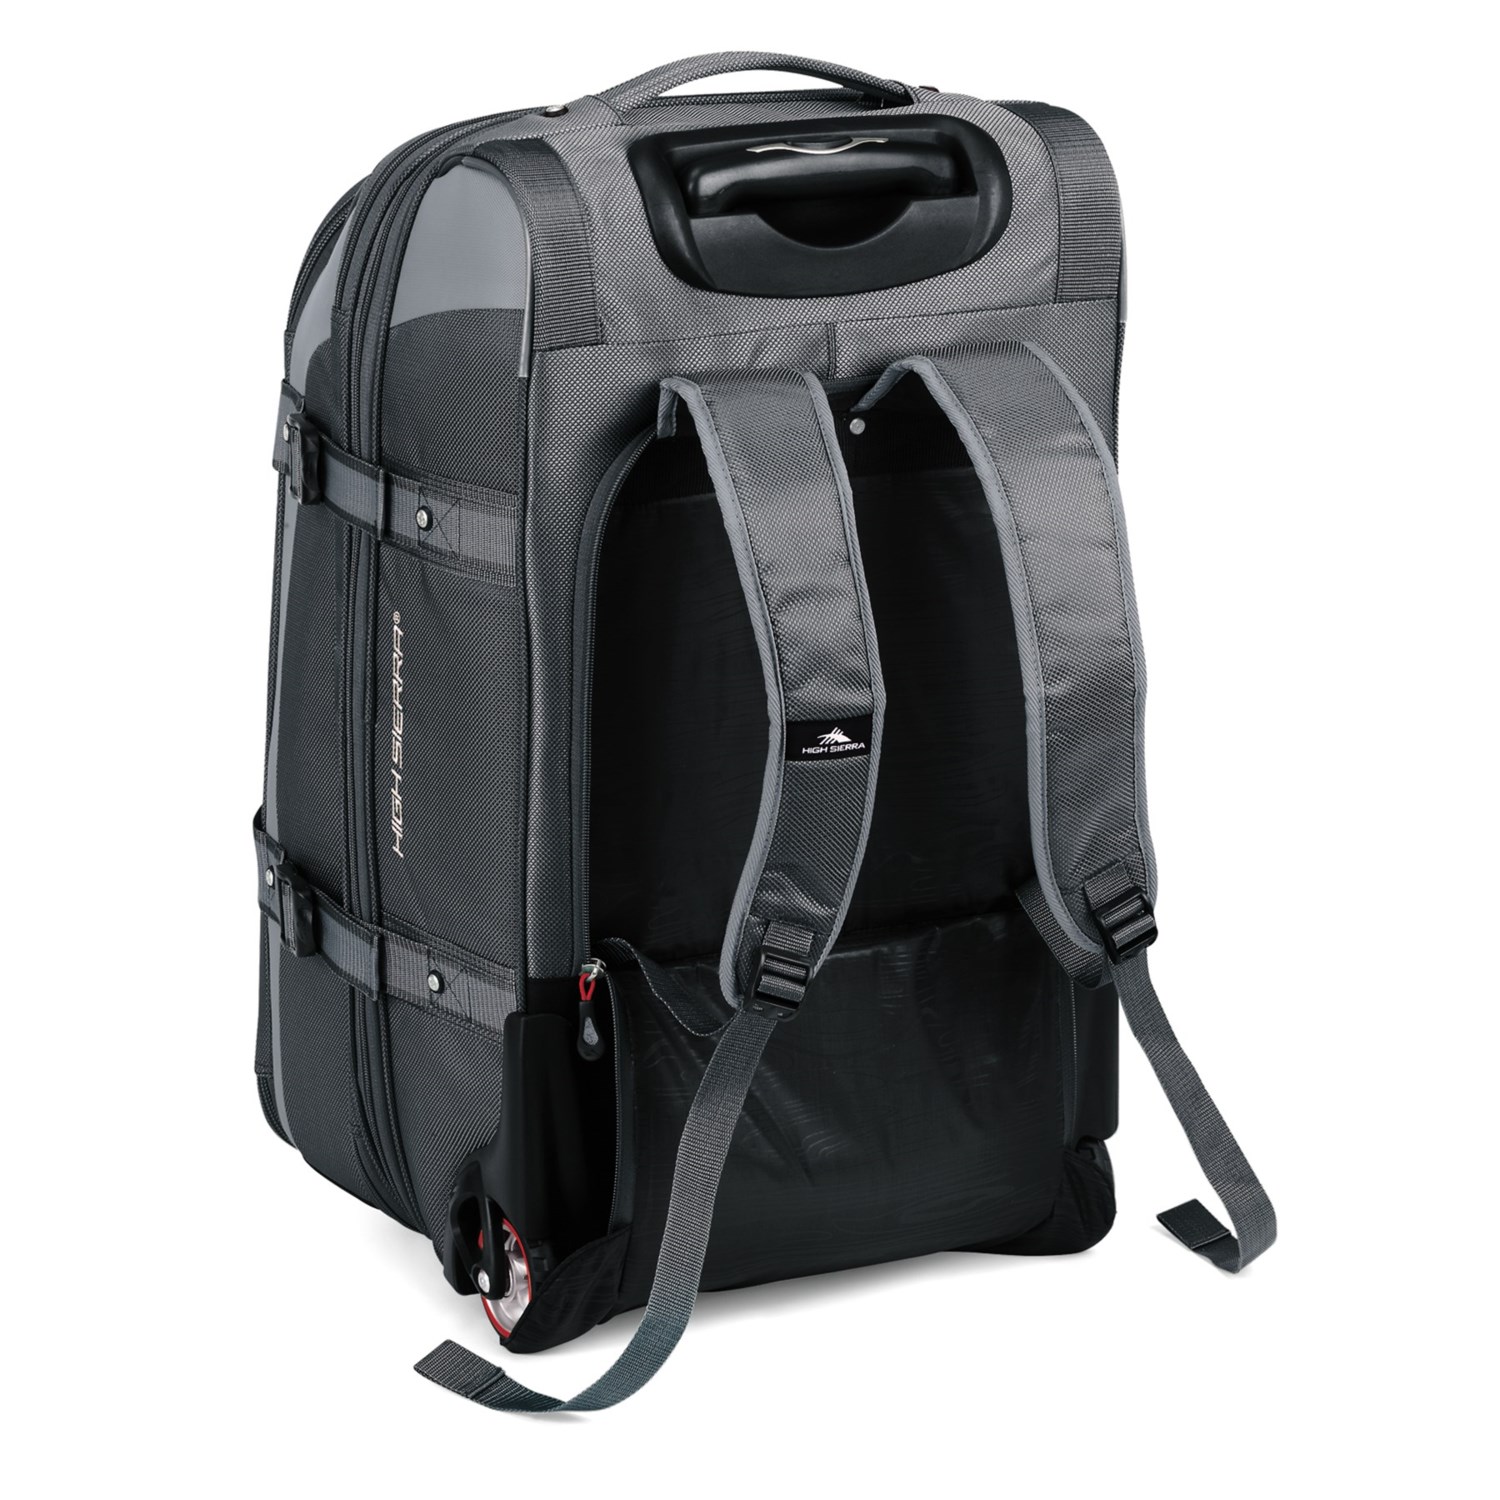 High Sierra AT6 Carry-On Expandable Rolling Duffel Bag - Save 41%